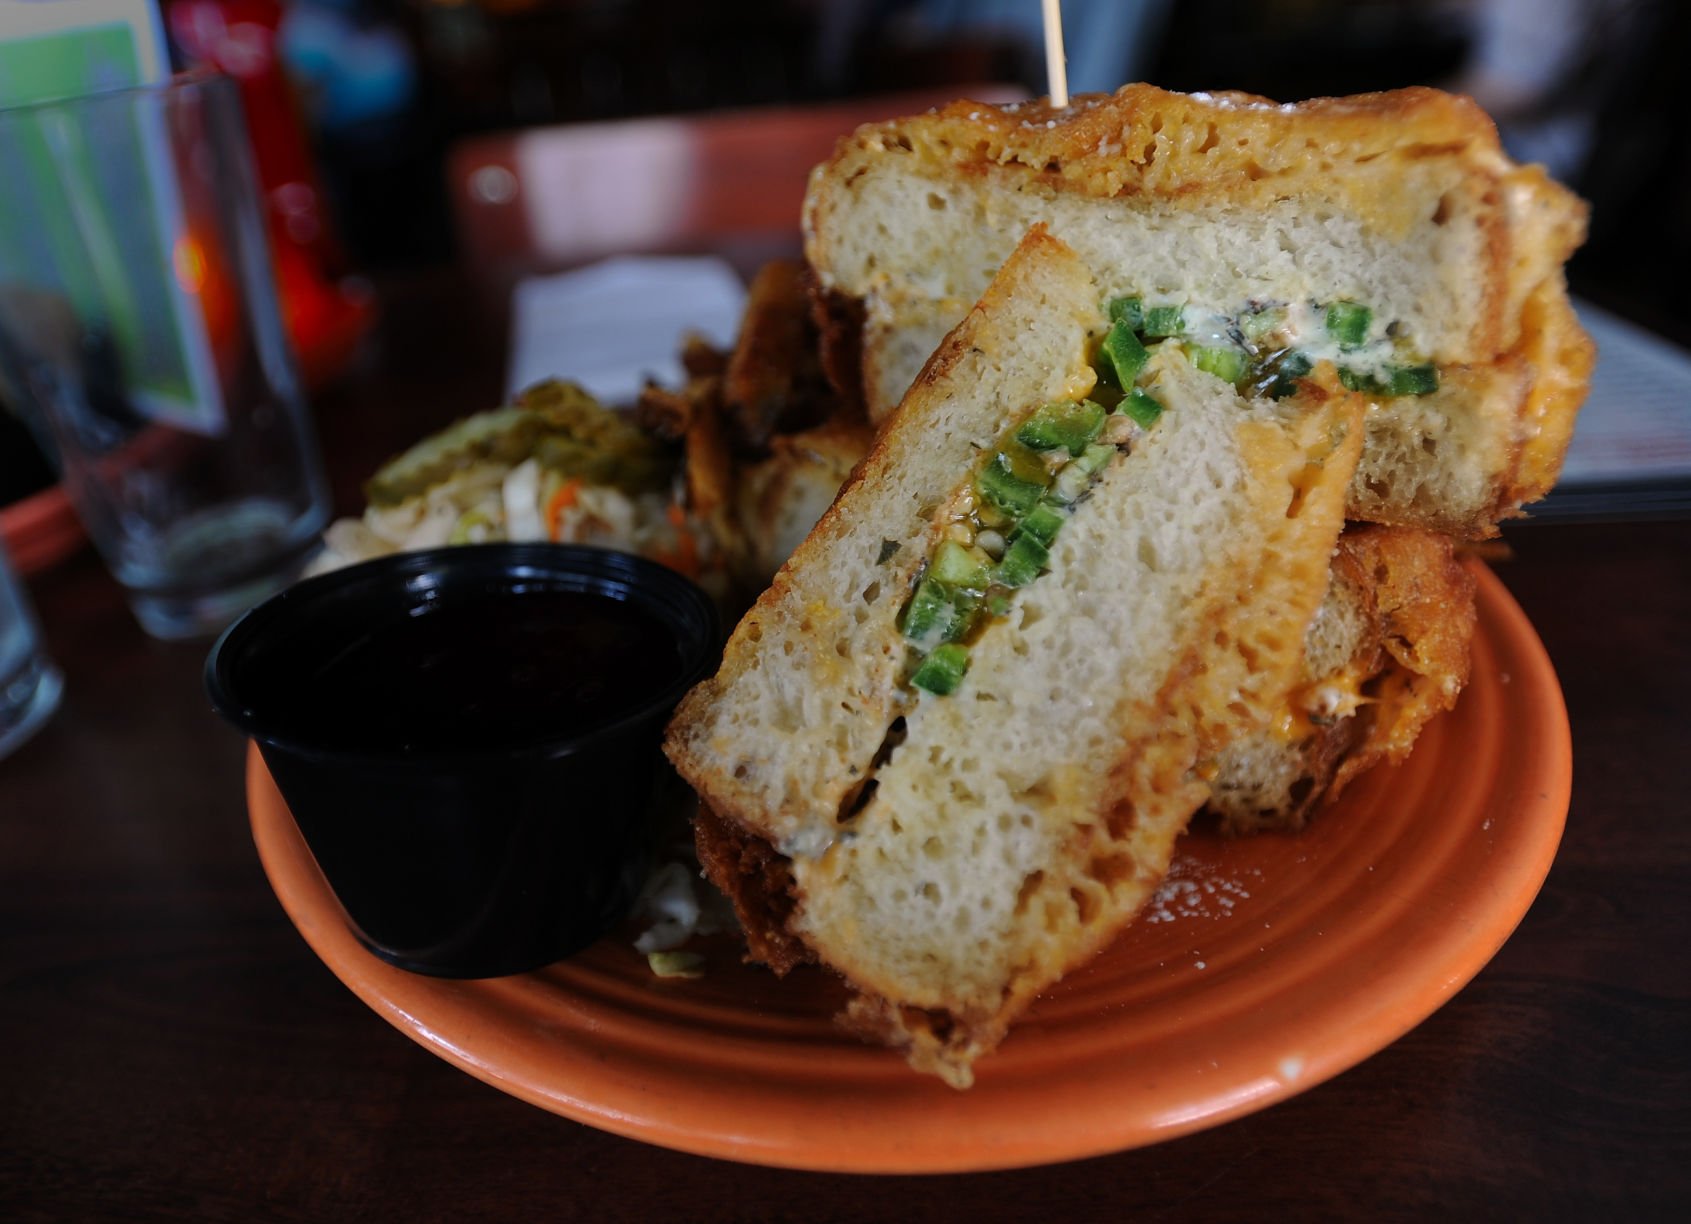 A Big Popper grilled cheese sandwich from Melt Bar and Grilled in Cleveland Heights